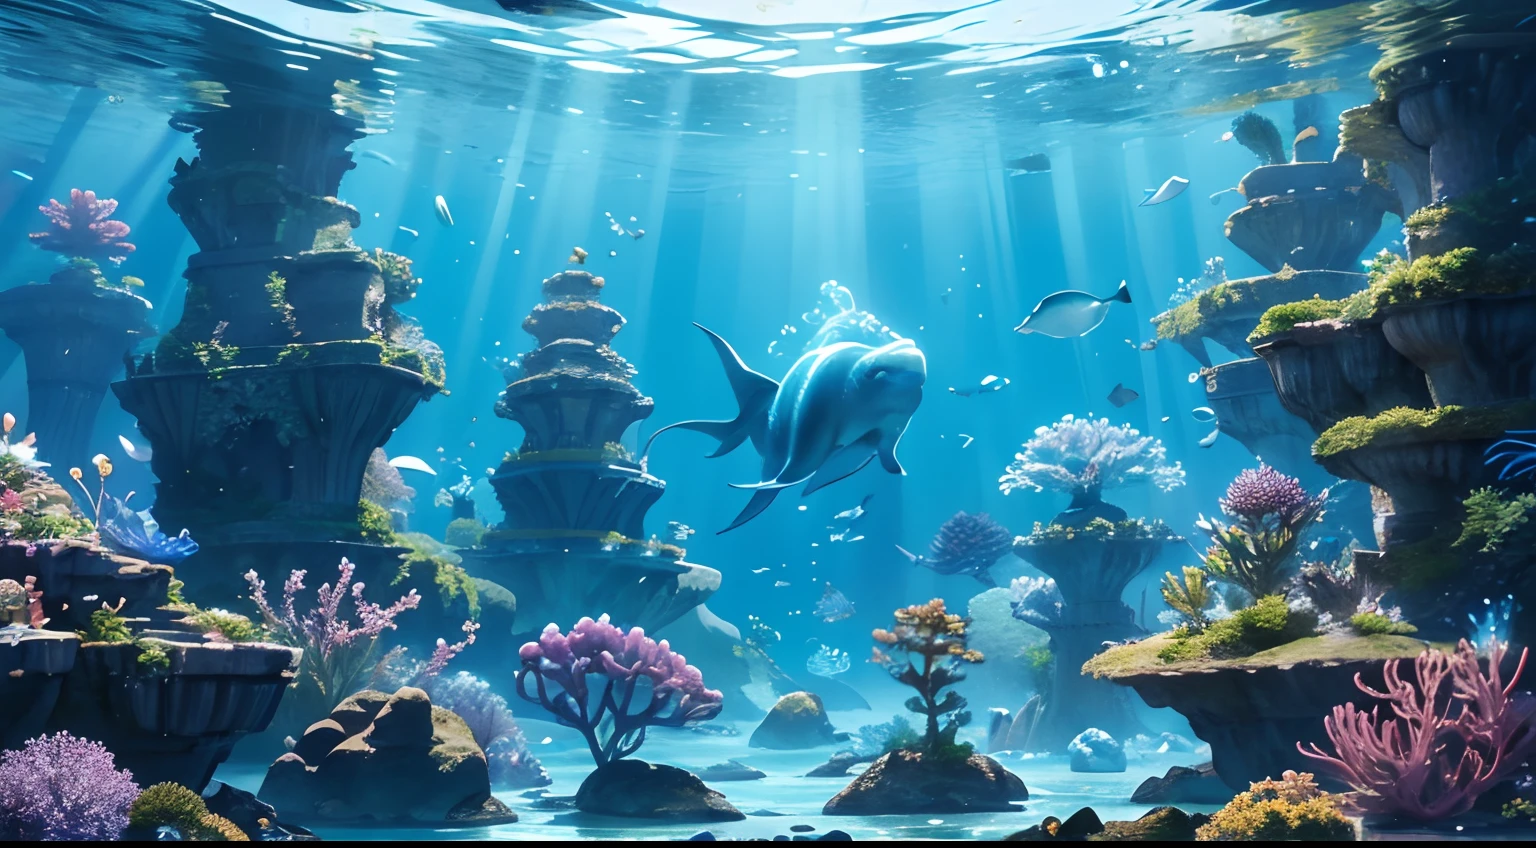 (best quality,4k,8k,highres,masterpiece:1.2),ultra-detailed,(realistic,photorealistic,photo-realistic:1.37),clear water waves,golden sandy beaches,sparkling mermaid tails,ancient ruins of a lost city,floating ships,(giant, majestic:1.1) jellyfish,enchanting coral reefs,magical sunken treasures,captivating underwater illumination,ethereal bioluminescence,beautifully intricate seashells,tranquil seafloor gardens,jewel-toned aquatic creatures,dreamlike underwater castles,mysterious sea creatures,dancing rays of sunlight,whispering seaweed forests,glowing jellyfish tentacles,glittering underwater caves,illuminated seahorses swimming gracefully,celestial underwater cityscape,serene ocean floor,gleaming golden treasures,enchanted mermaid grottoes,crystal-clear glass bottle,submerged ancient statues,exotic marine plants,dazzling sunbeams filtering through the water,deep-sea wonders,shimmering water reflections,playful dolphins leaping in the distance,spectacular underwater biodiversity,diverse schools of fish,evocative ocean mist,sublime underwater beauty,mystical aura of Atlantis,secretive underwater passageways,otherworldly marine life,sunken pirate ship with hidden treasures,secrets of the deep sea unveiled,Nereid's magical realm,water illuminated by moonlight,whales singing in the distance,dreamy underwater ambiance,unexplored depths of the ocean,glowing lantern fish,pulsating sea anemones,vibrant exotic fish swimming in harmony,serenity of the underwater world,mesmerizing play of lights and shadows,undulating ocean currents,unearthly marine colors,underwater ballet of sea creatures.